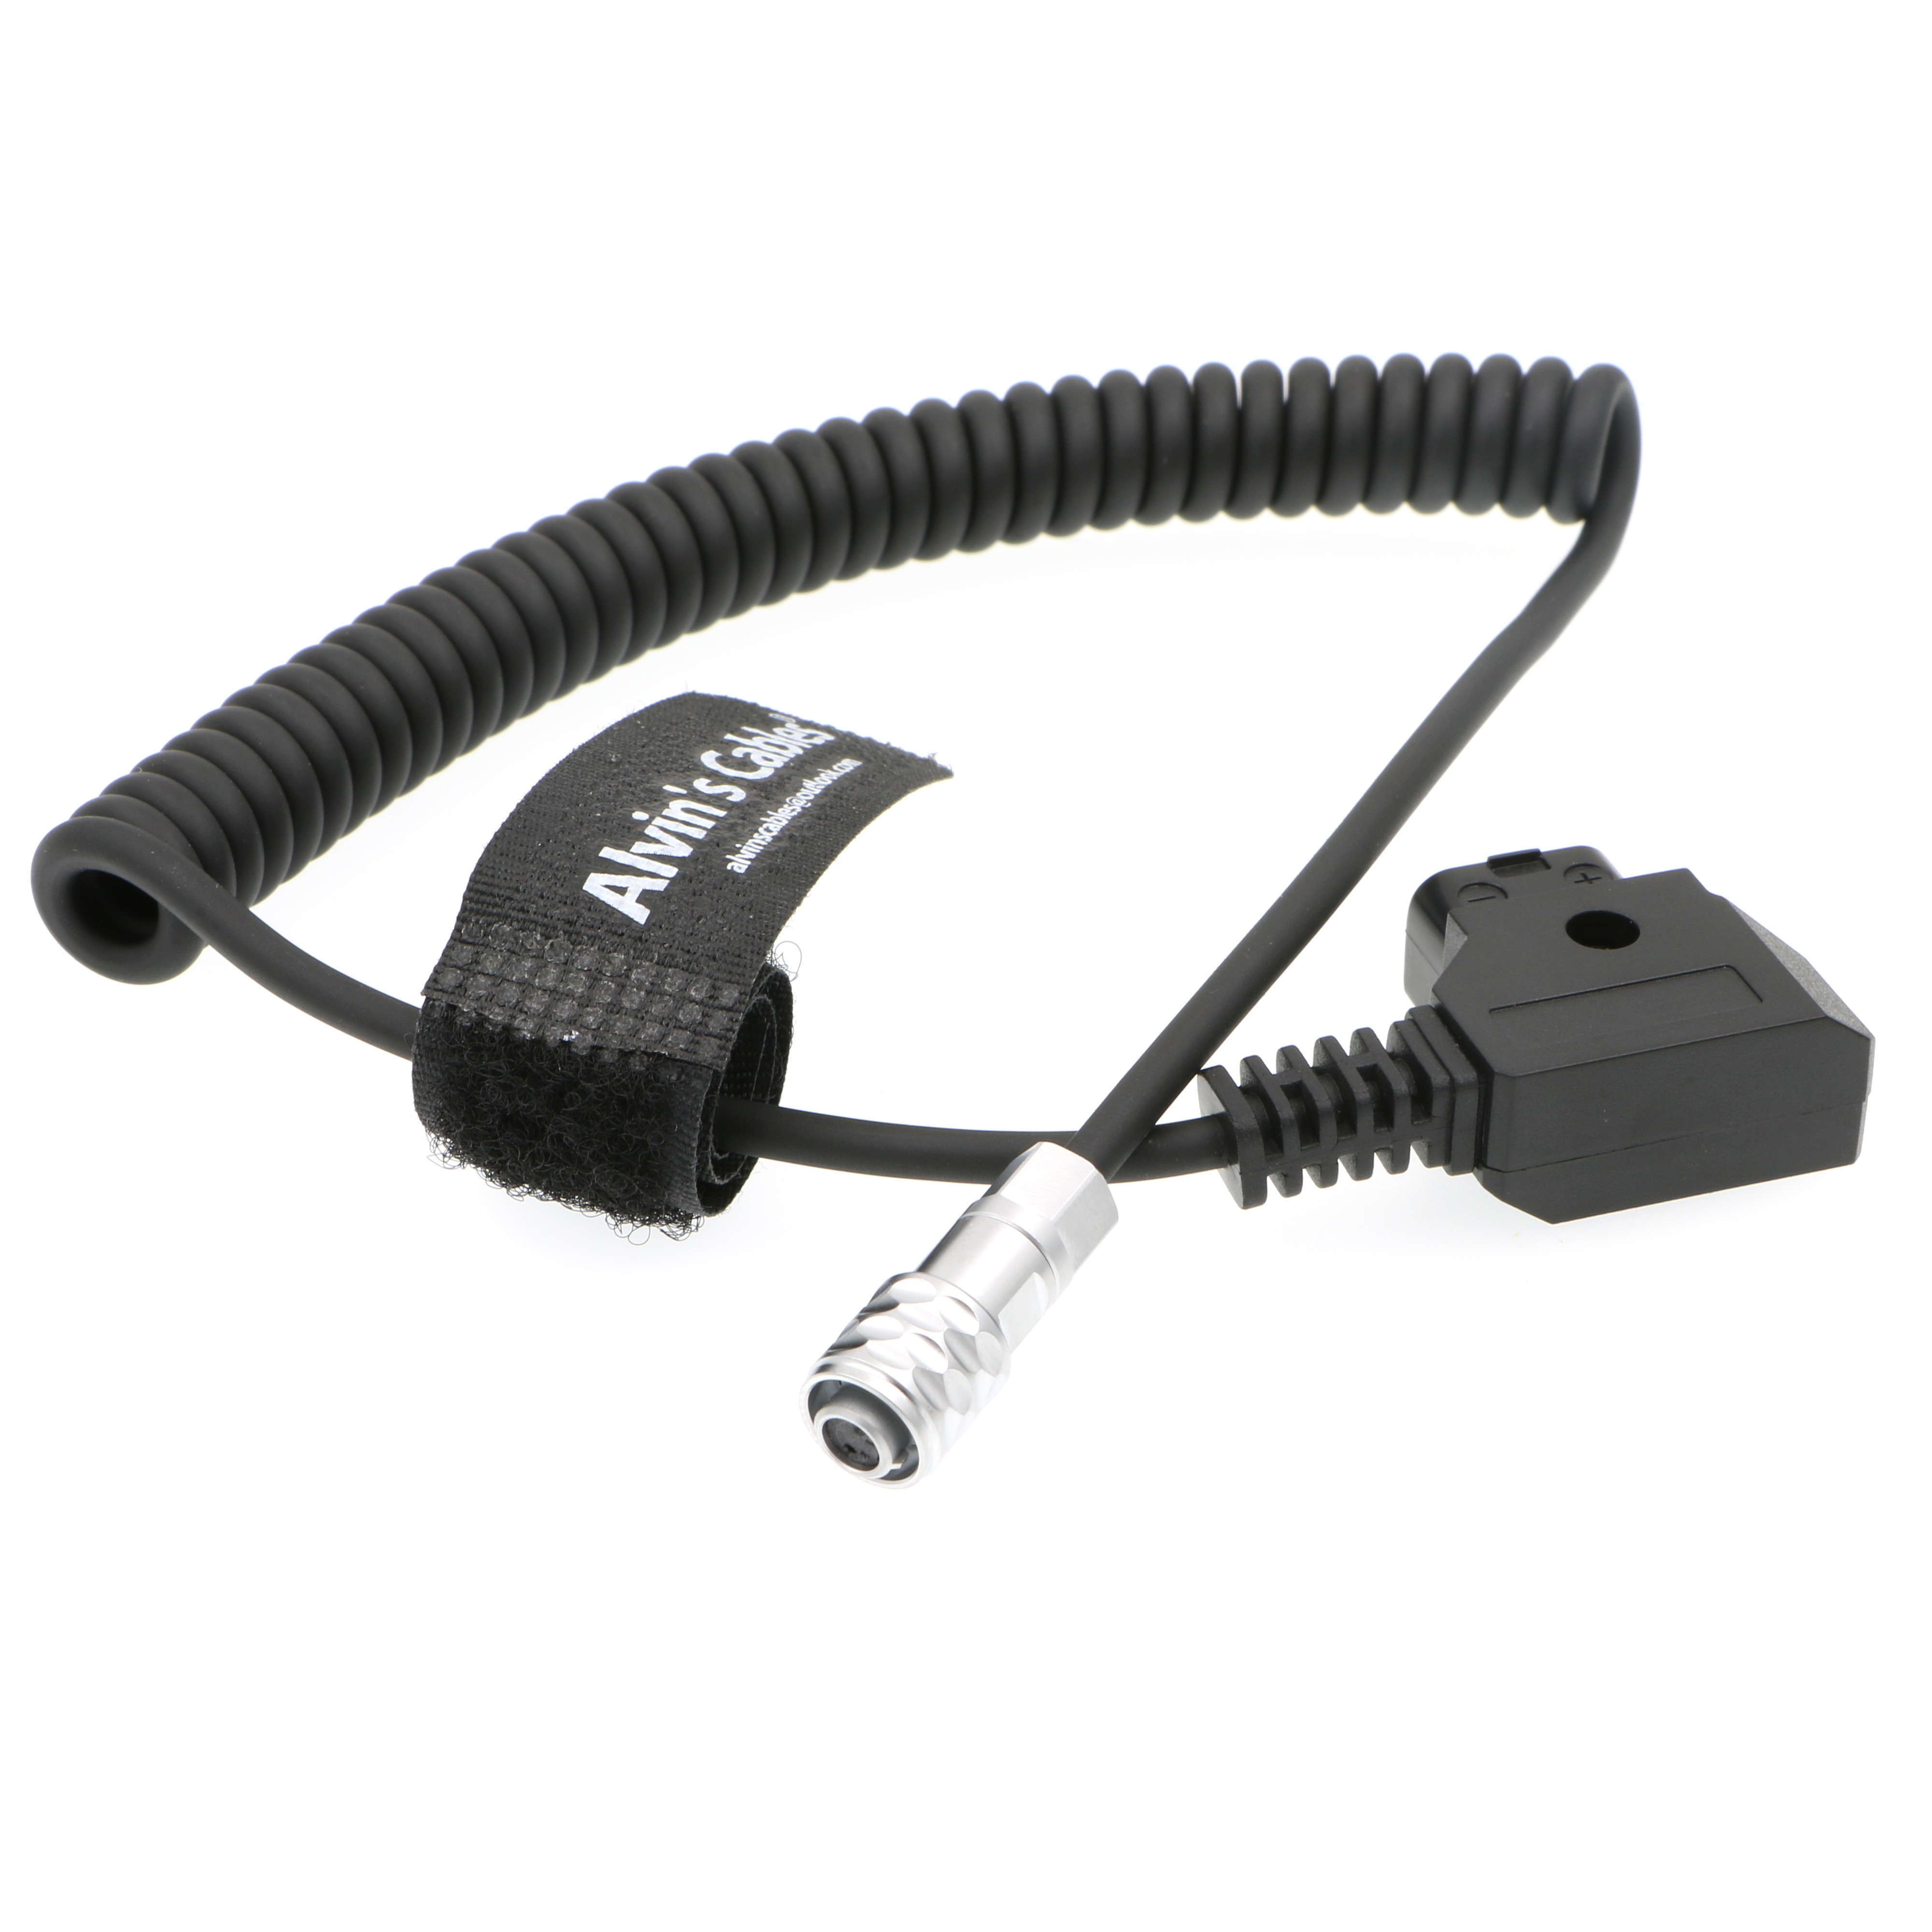 BMPCC 4K to D Tap Power Cable for Blackmagic Pocket Cinema Camera 